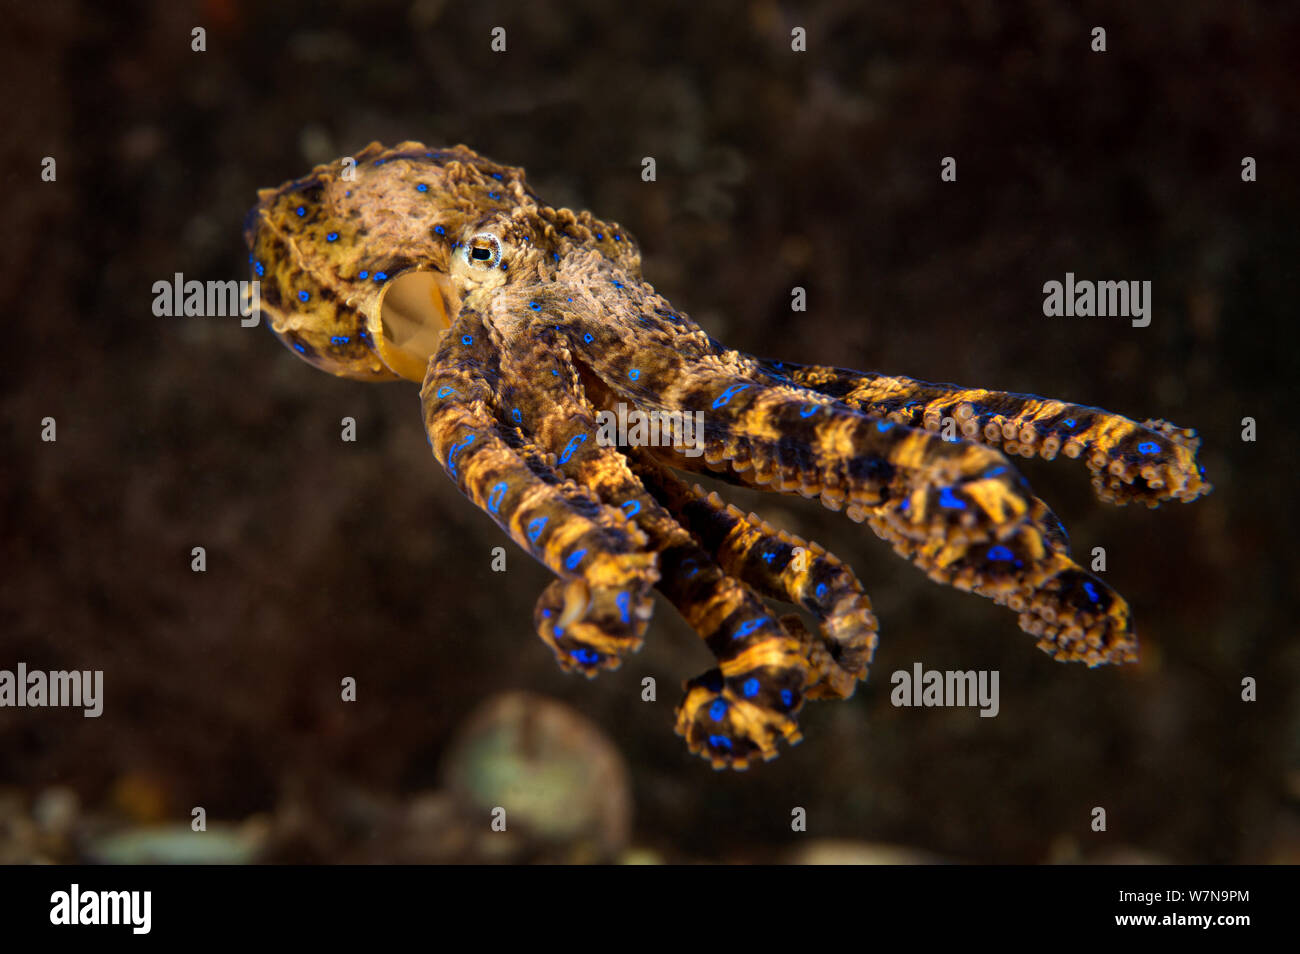 Southern / pacific blue-ringed octopus (Hapalochlaena maculosa) swims across the seabed. Port Philip Bay, Blairgowrie, Melbourne, Victoria, Australia. Stock Photo